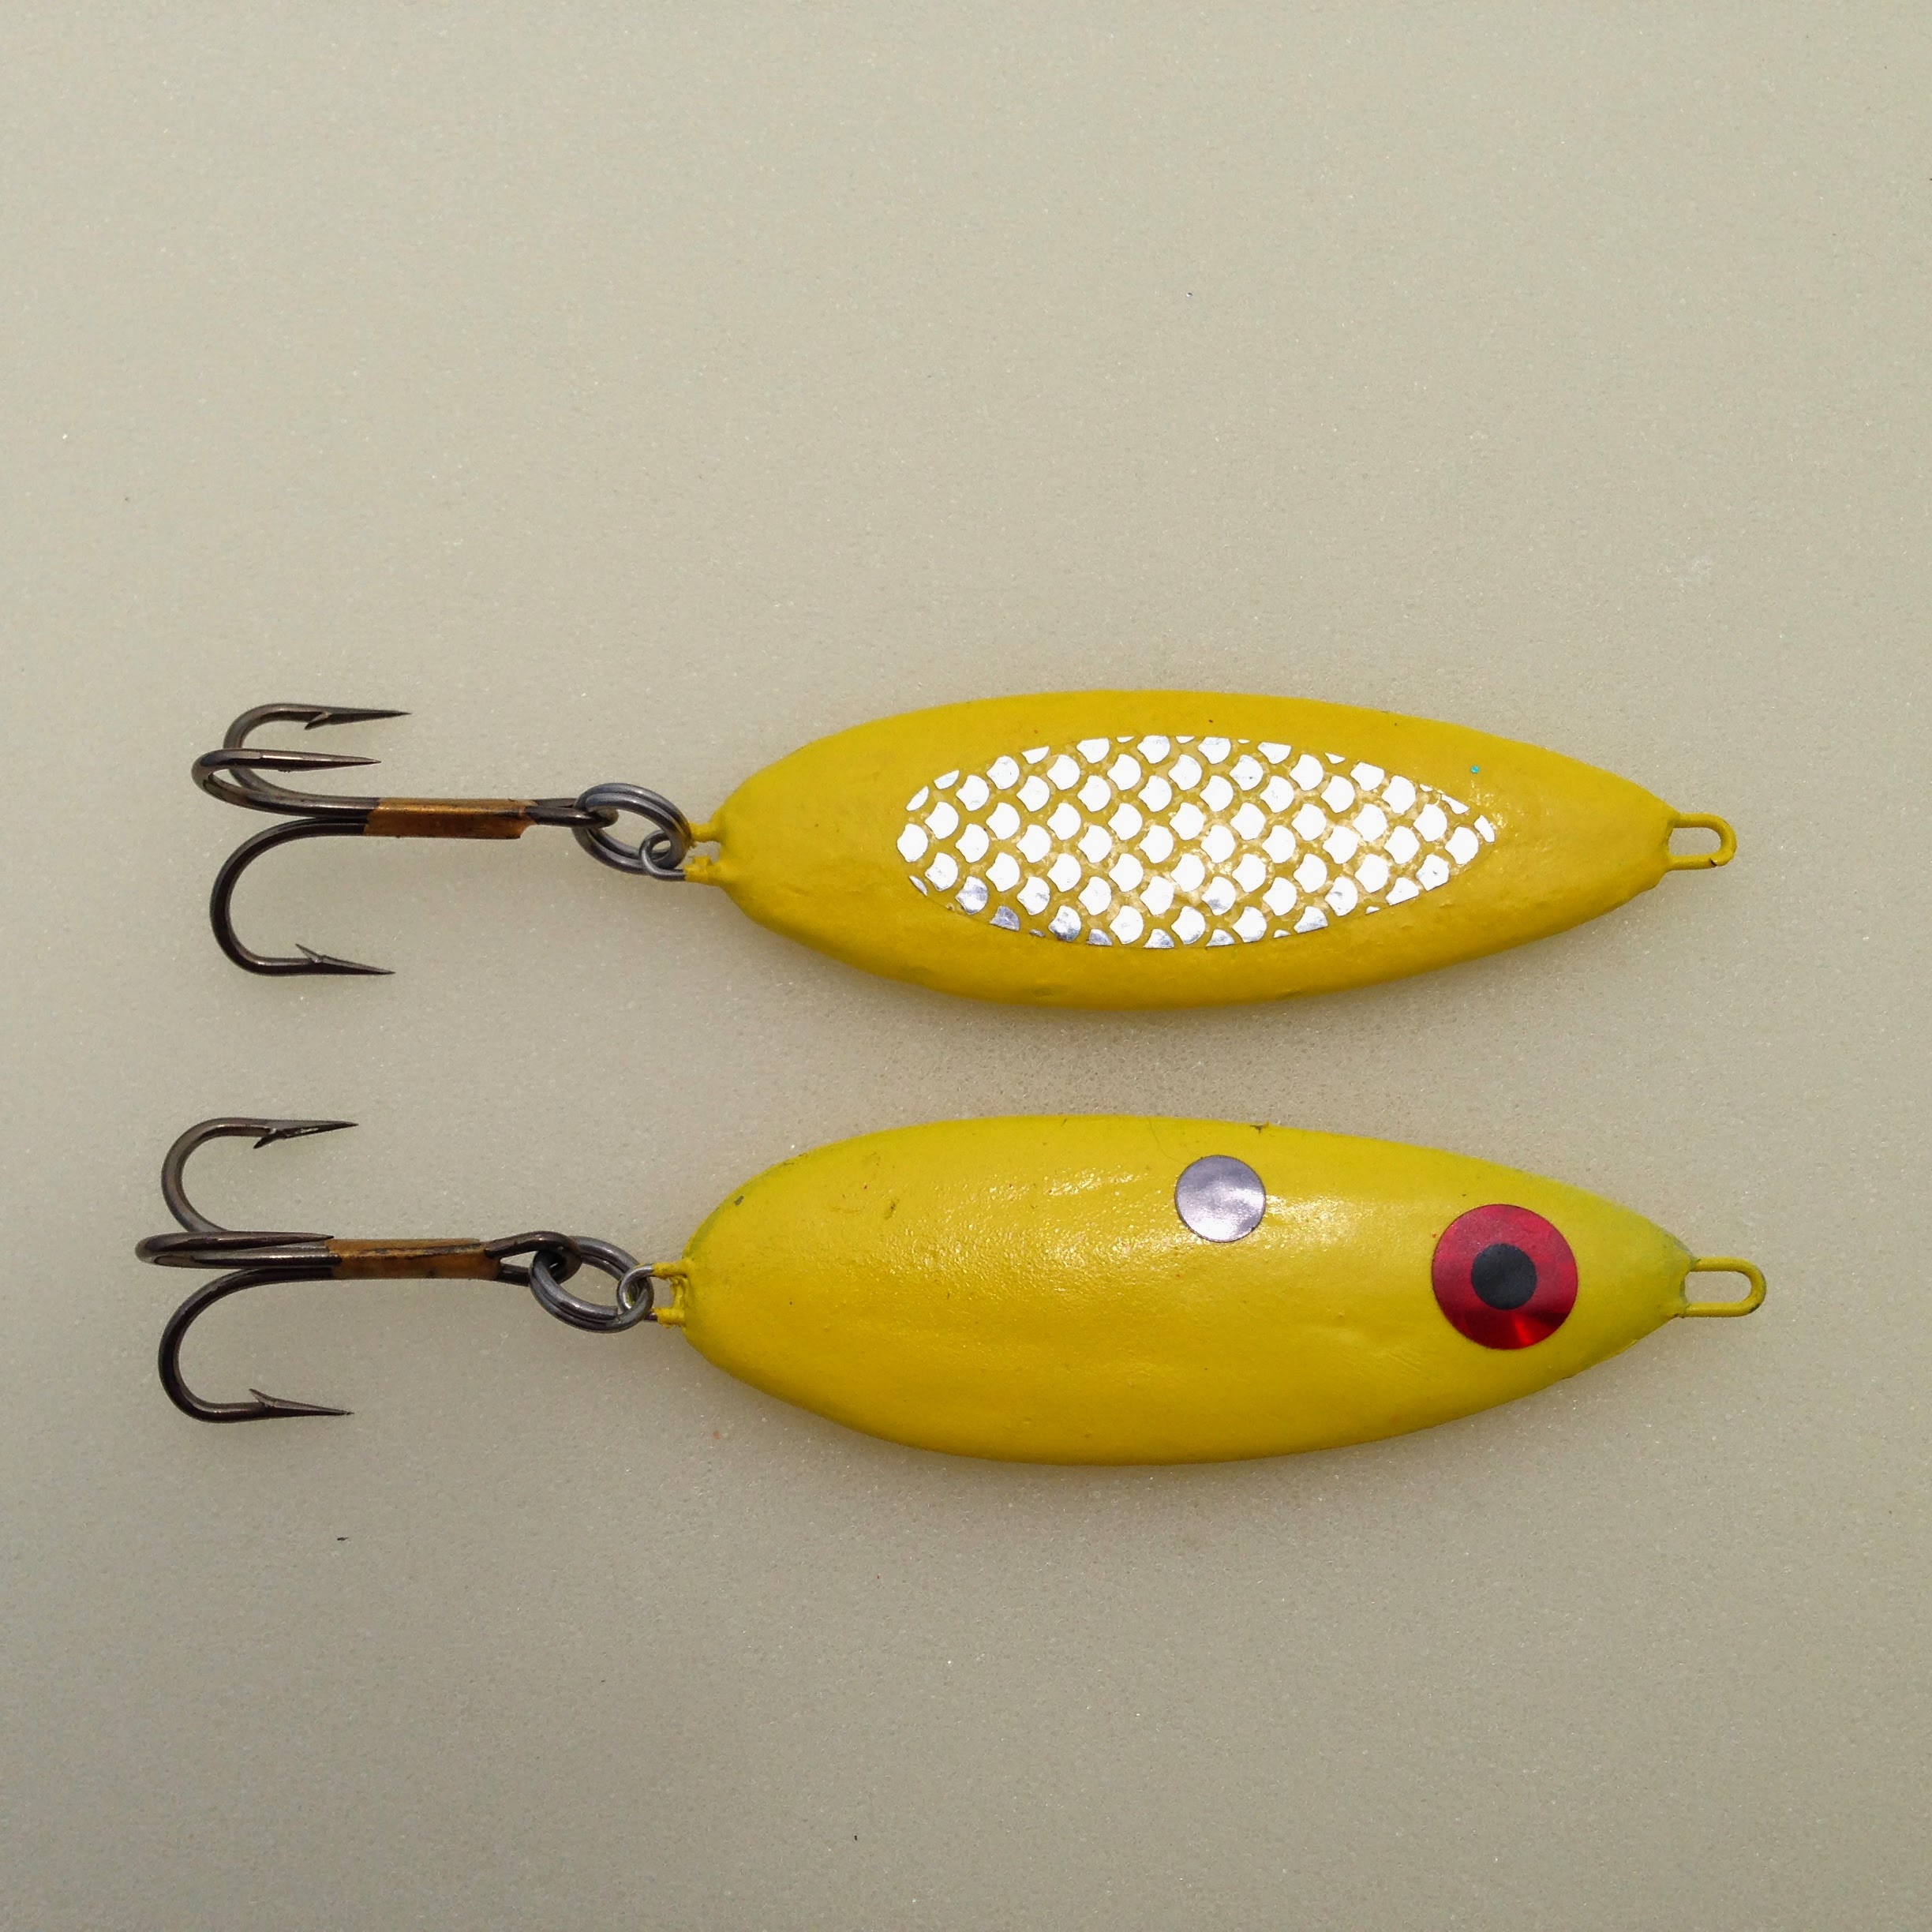 Best Freshwater Lures In 2020 – Every Angler Should Have In Their Tackle! 